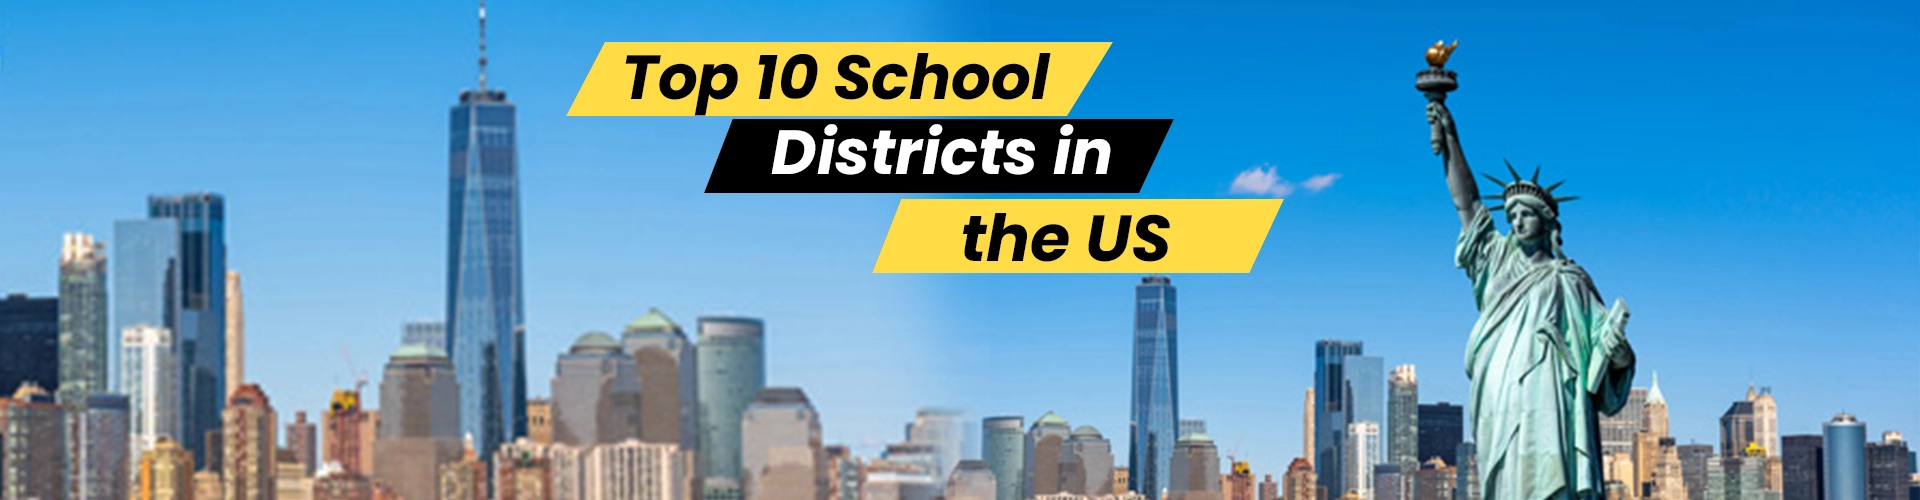 Top 10 School Districts in the US